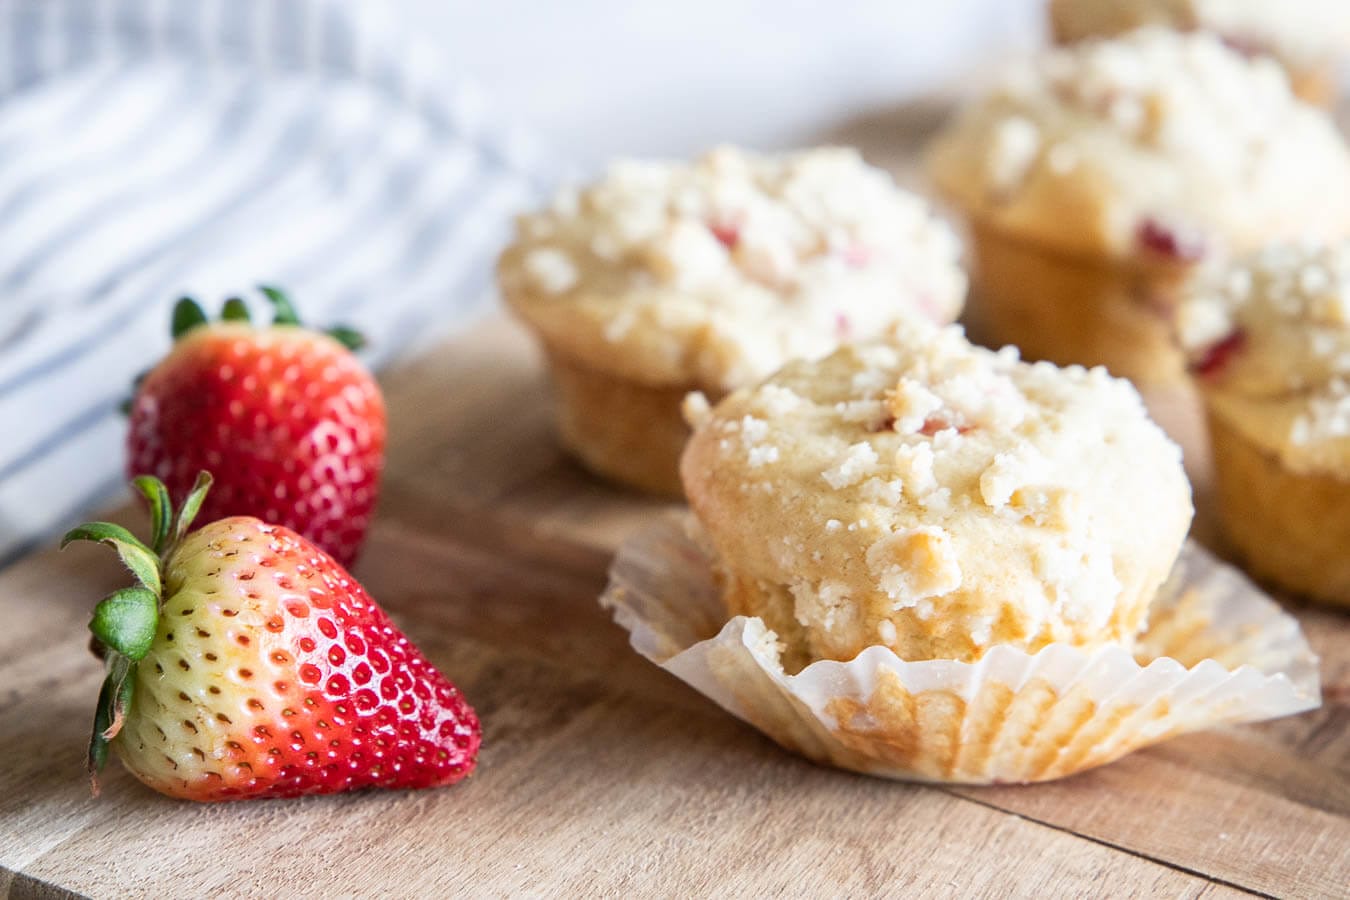 Amazing Strawberry Muffins with Cream Cheese Filling